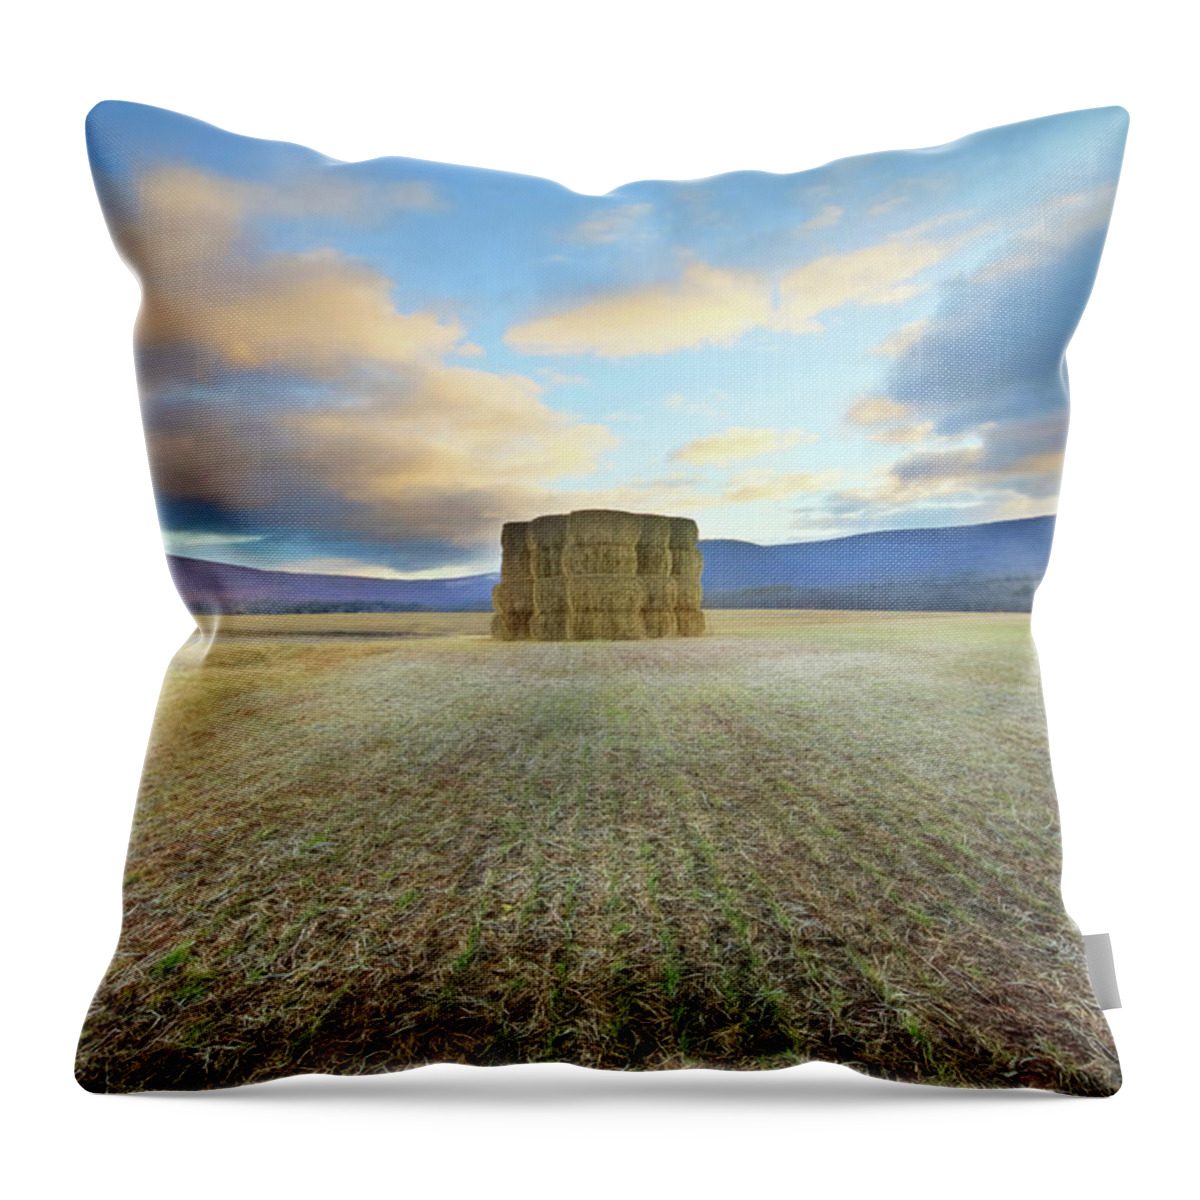 Farming Throw Pillow featuring the photograph See the Beauty by Lori Deiter